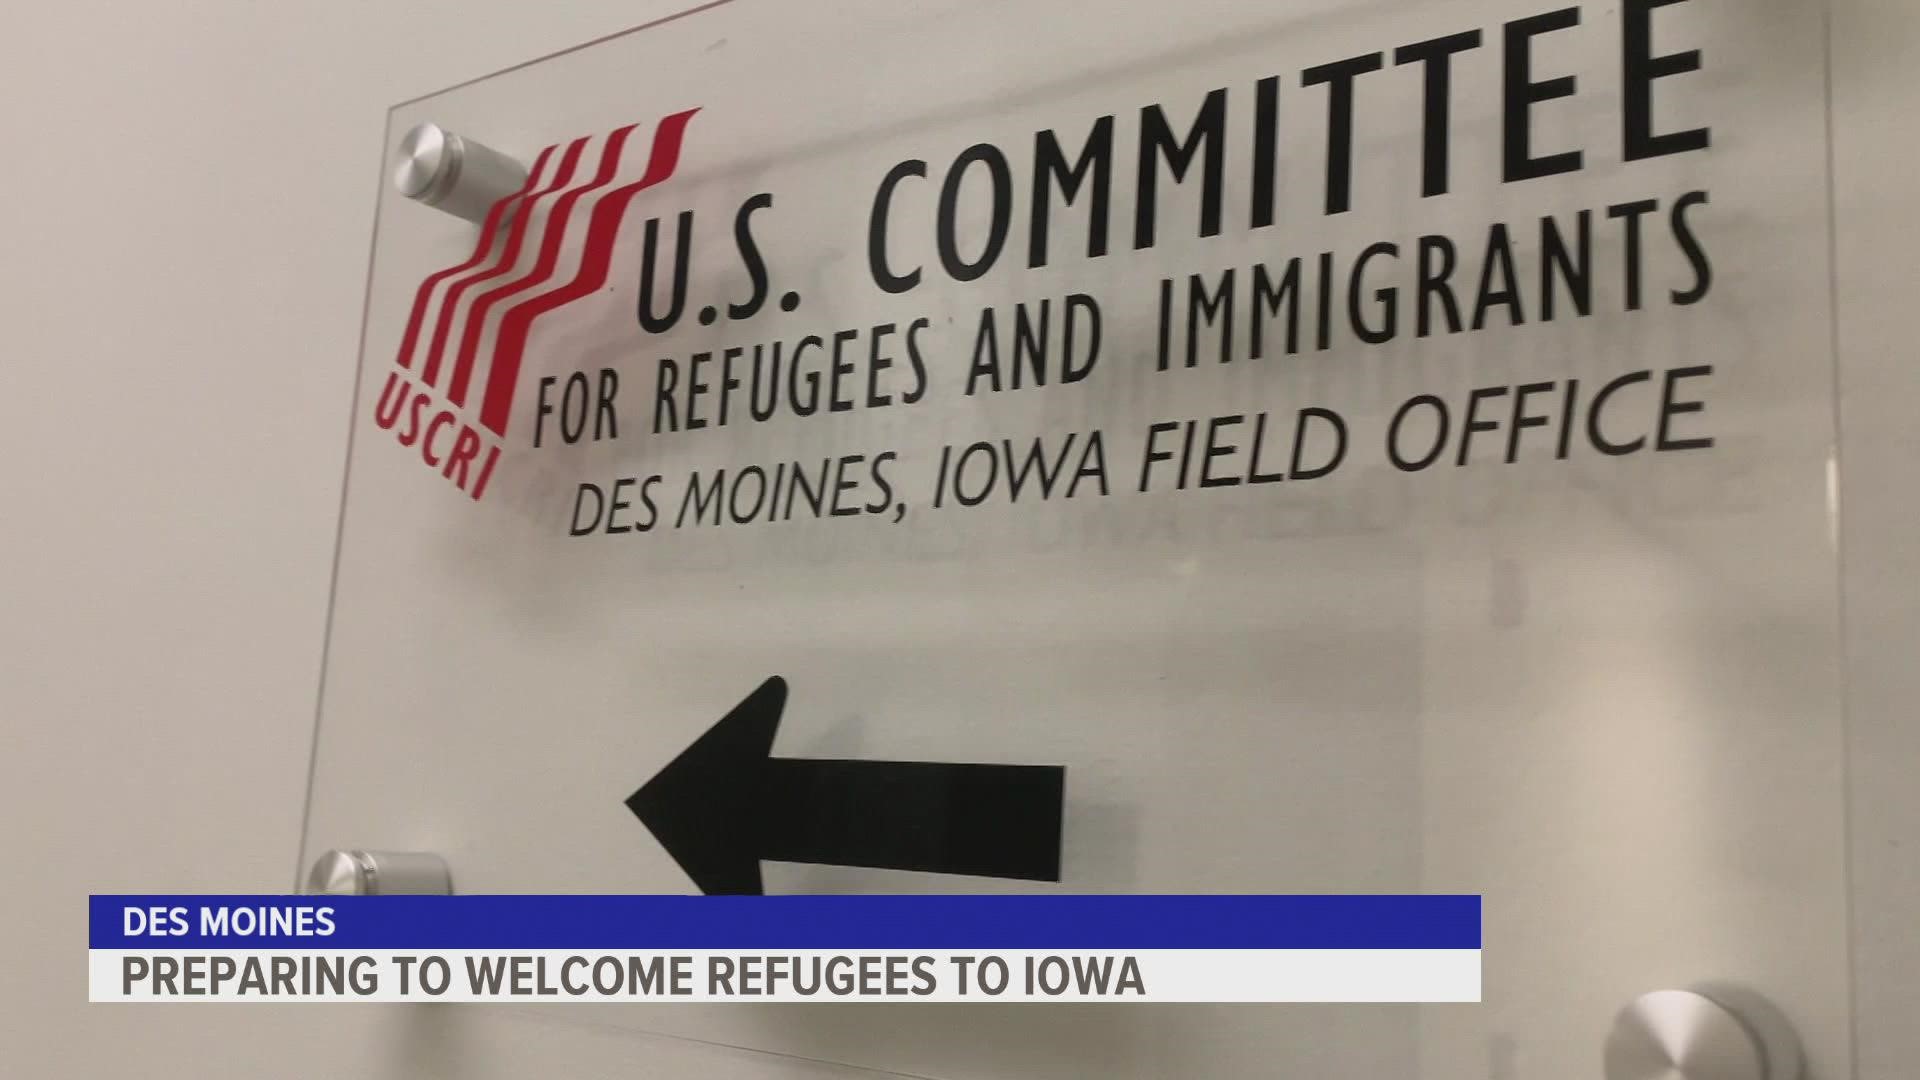 Resettlement partners have the capacity to settle about 350 people in the short term, according to the Iowa Department of Human Services.